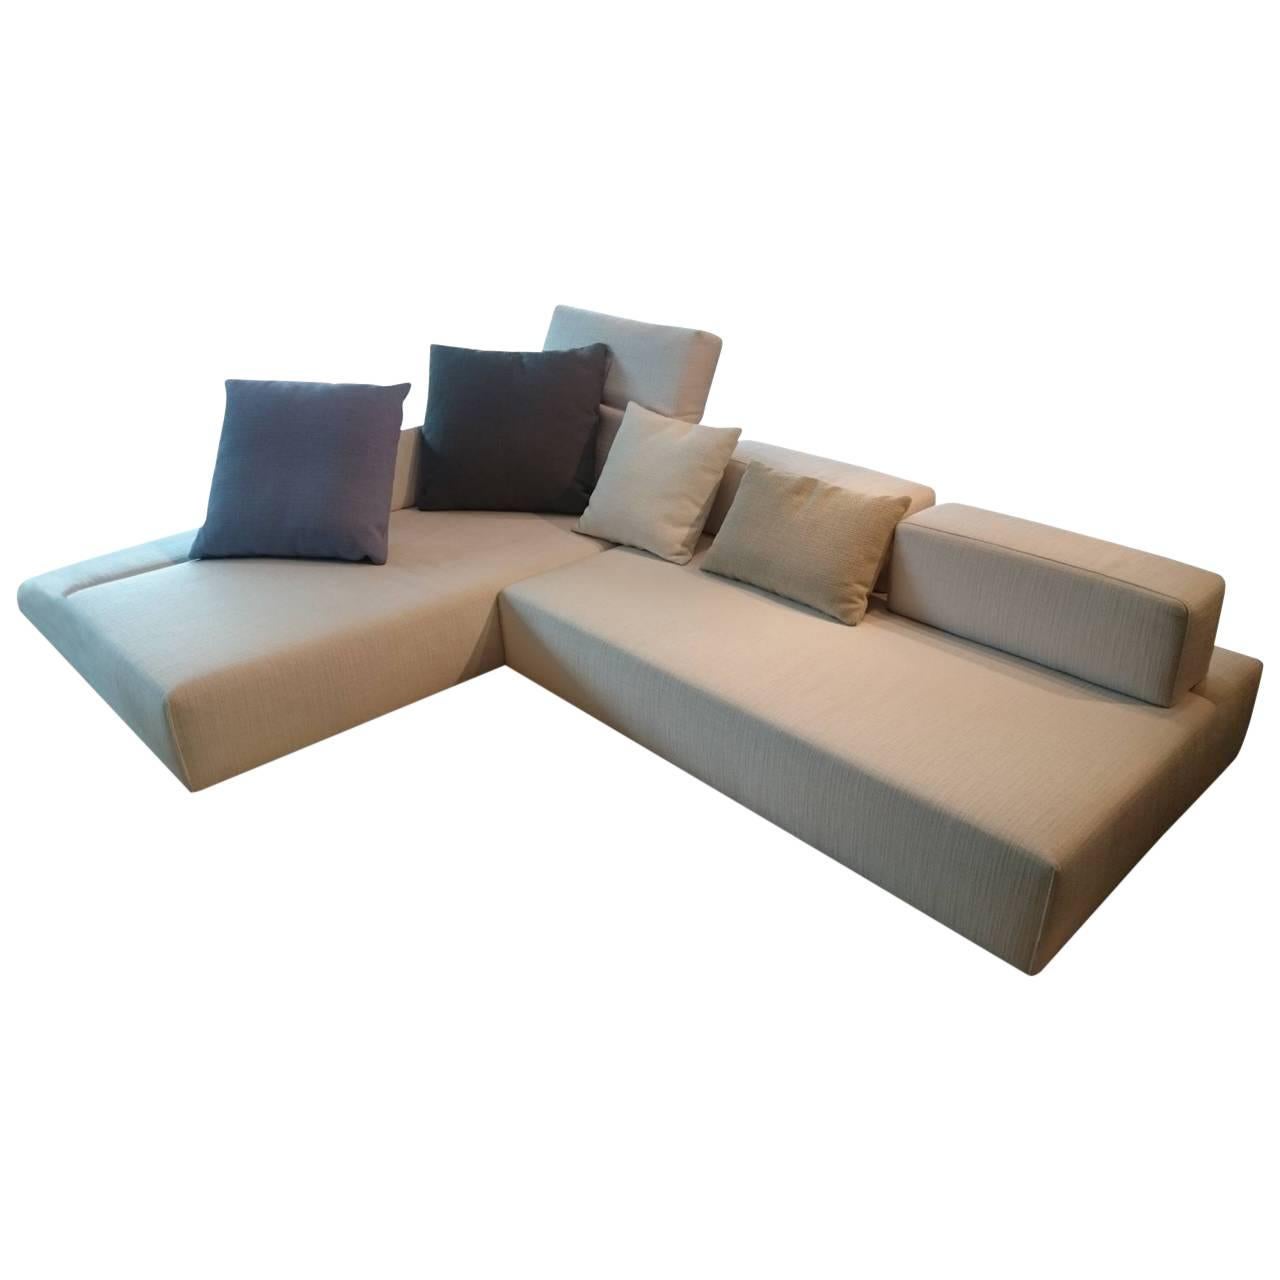 Sofa "Fields" by Manufacturer Brühl Finished in Fabric, Wood and Chrome For Sale